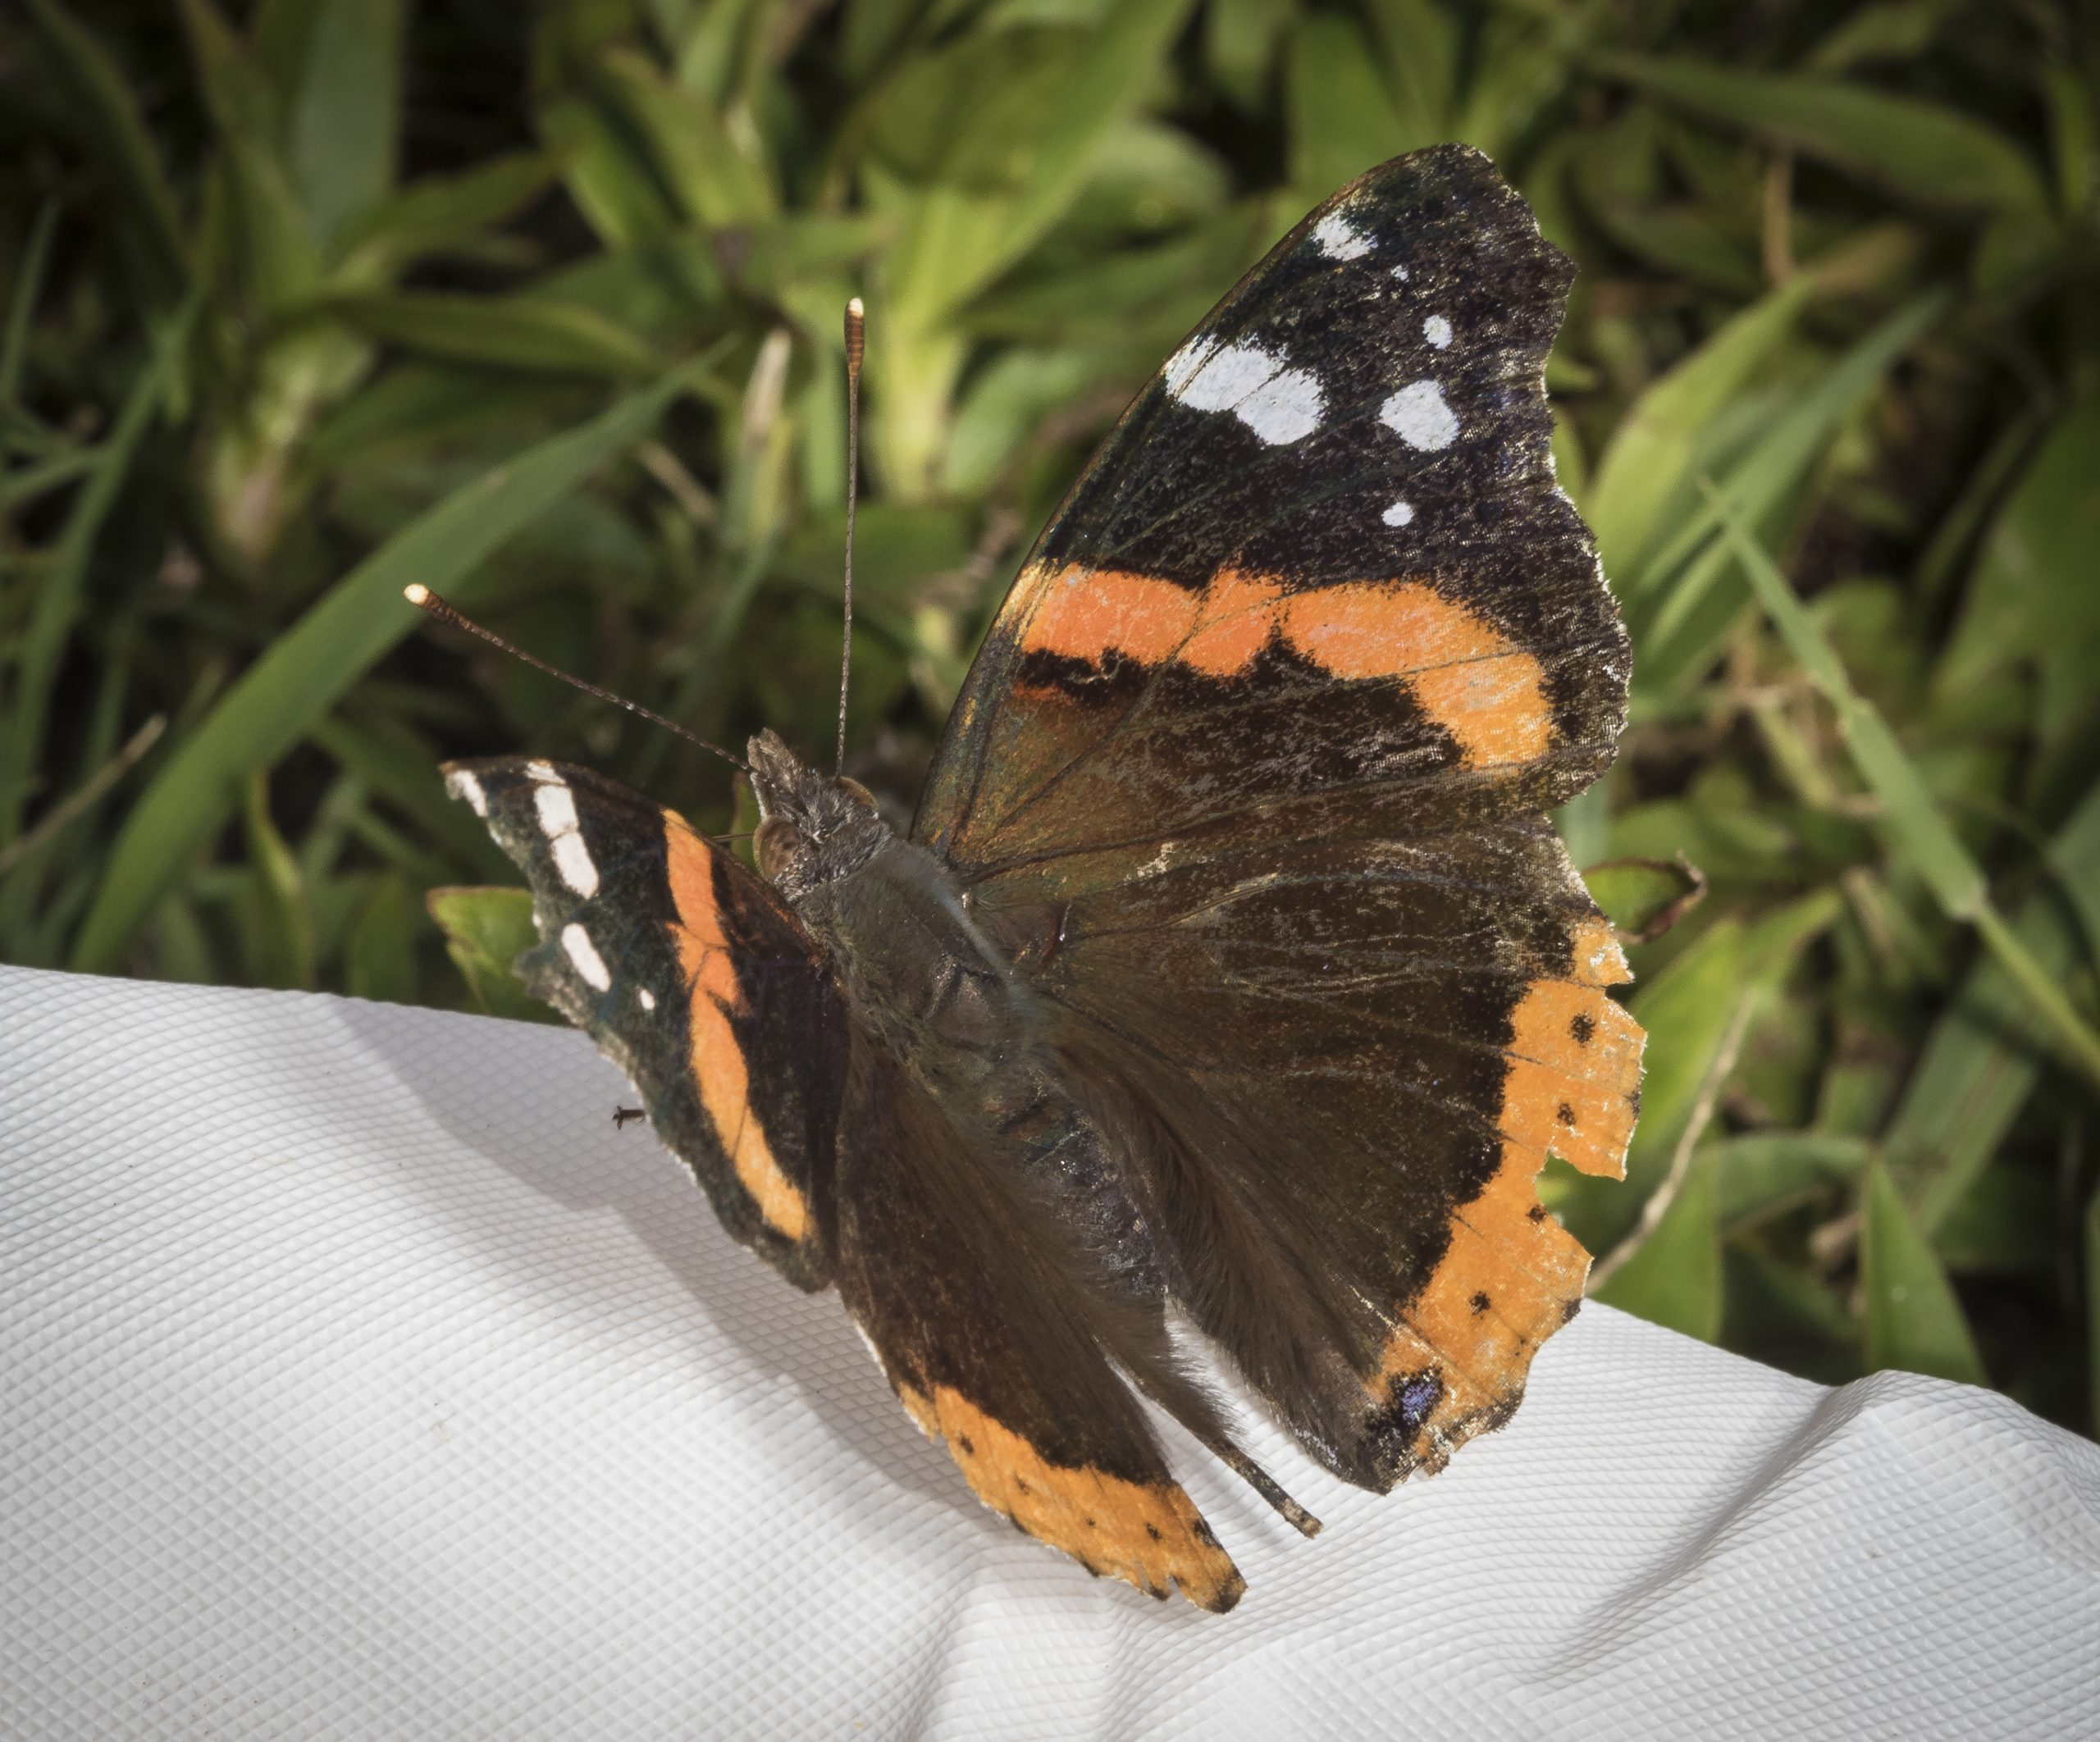 Red admiral butterfly at Mason Farm.